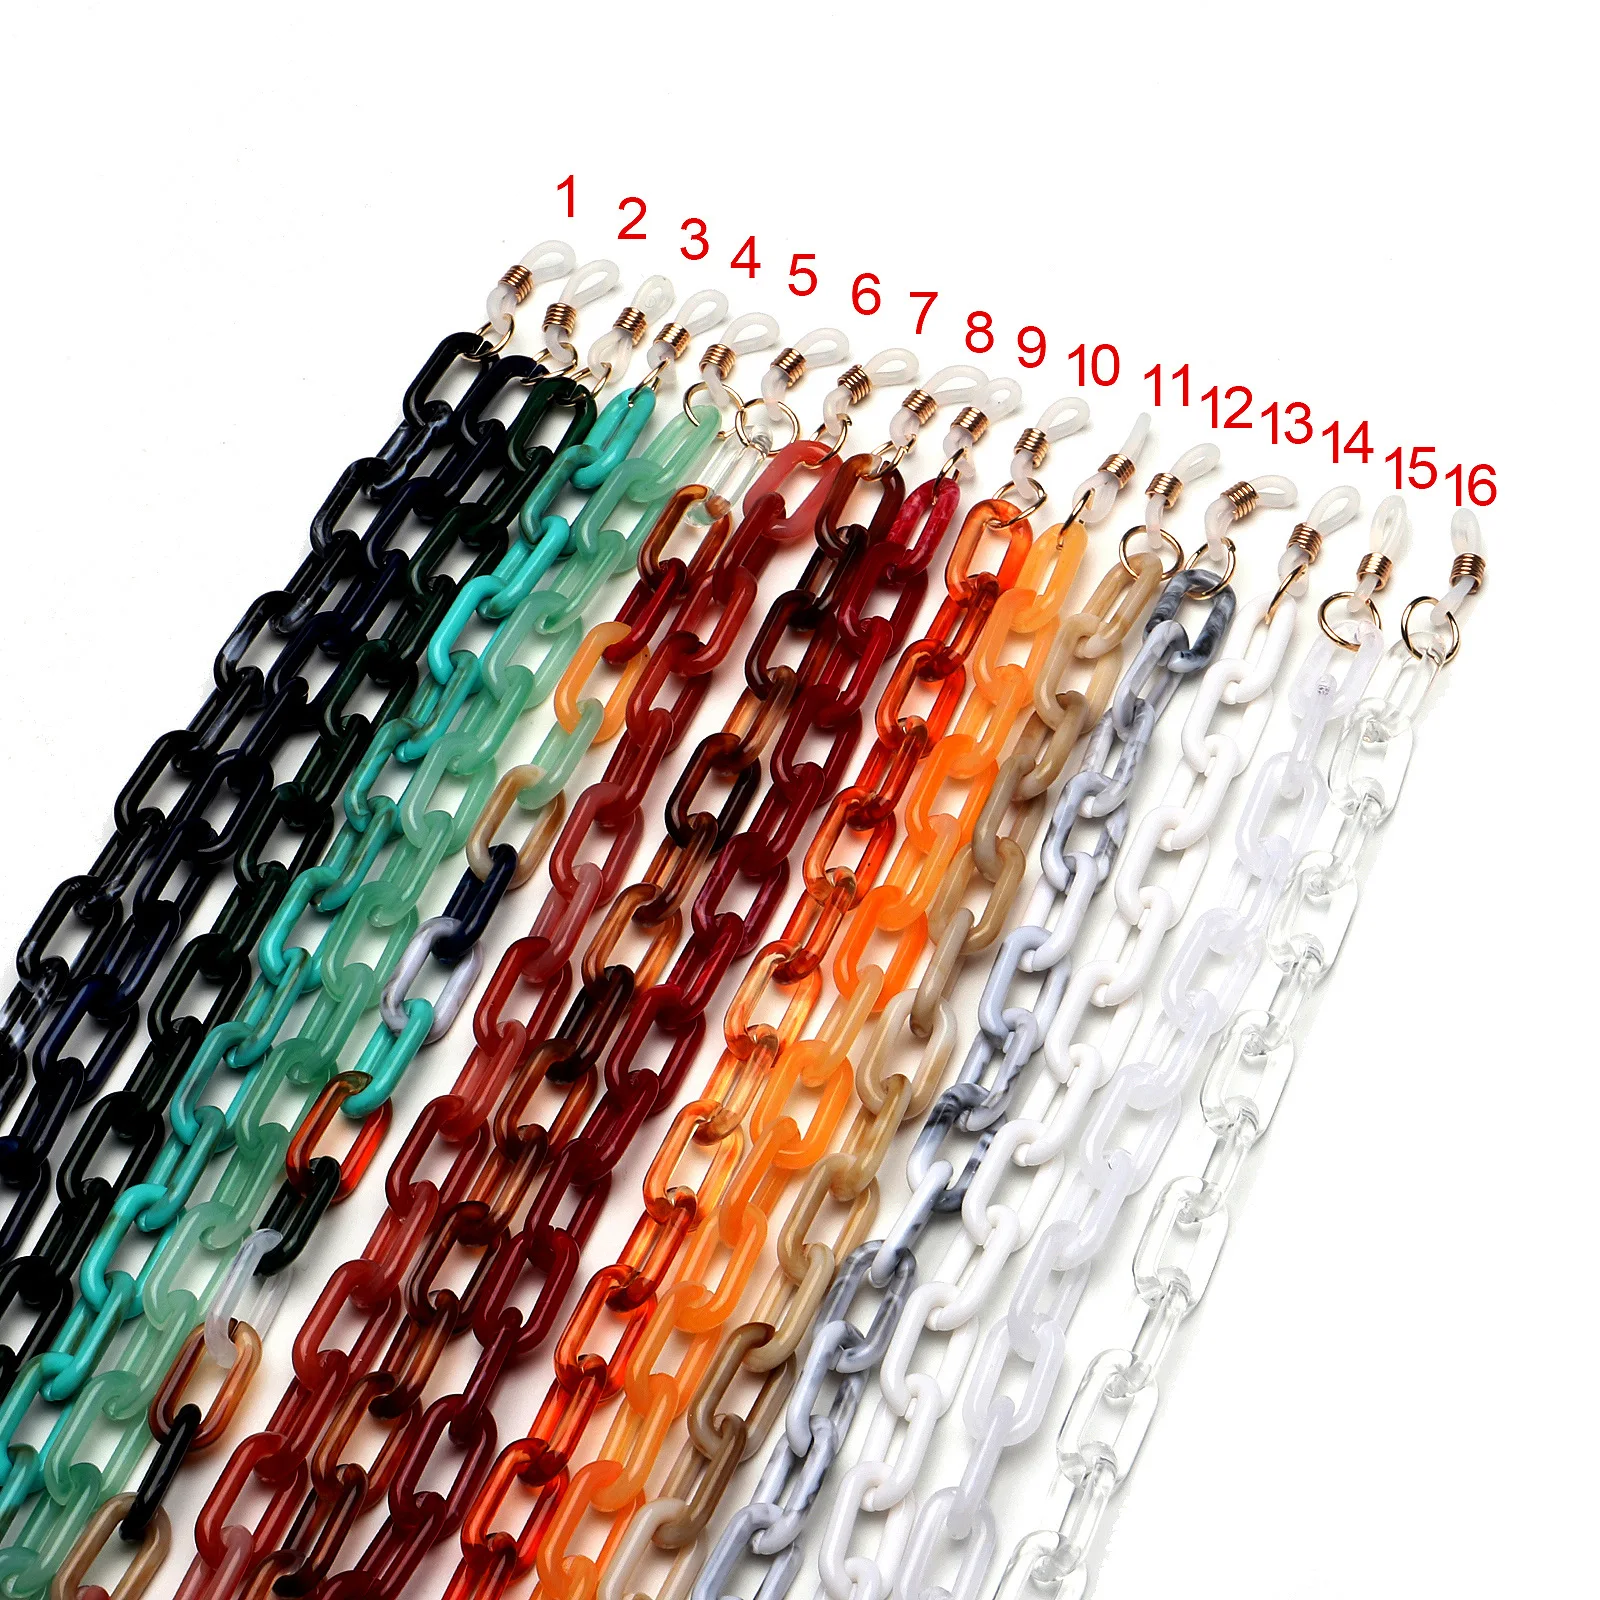 

Ring Hanging Plastic Acetic Acid Acrylic Sun Reading Glasses Sunglasses Eyeglass Eyewear Glass Spectacle Holders Chain Cords, 16colors for your choosing